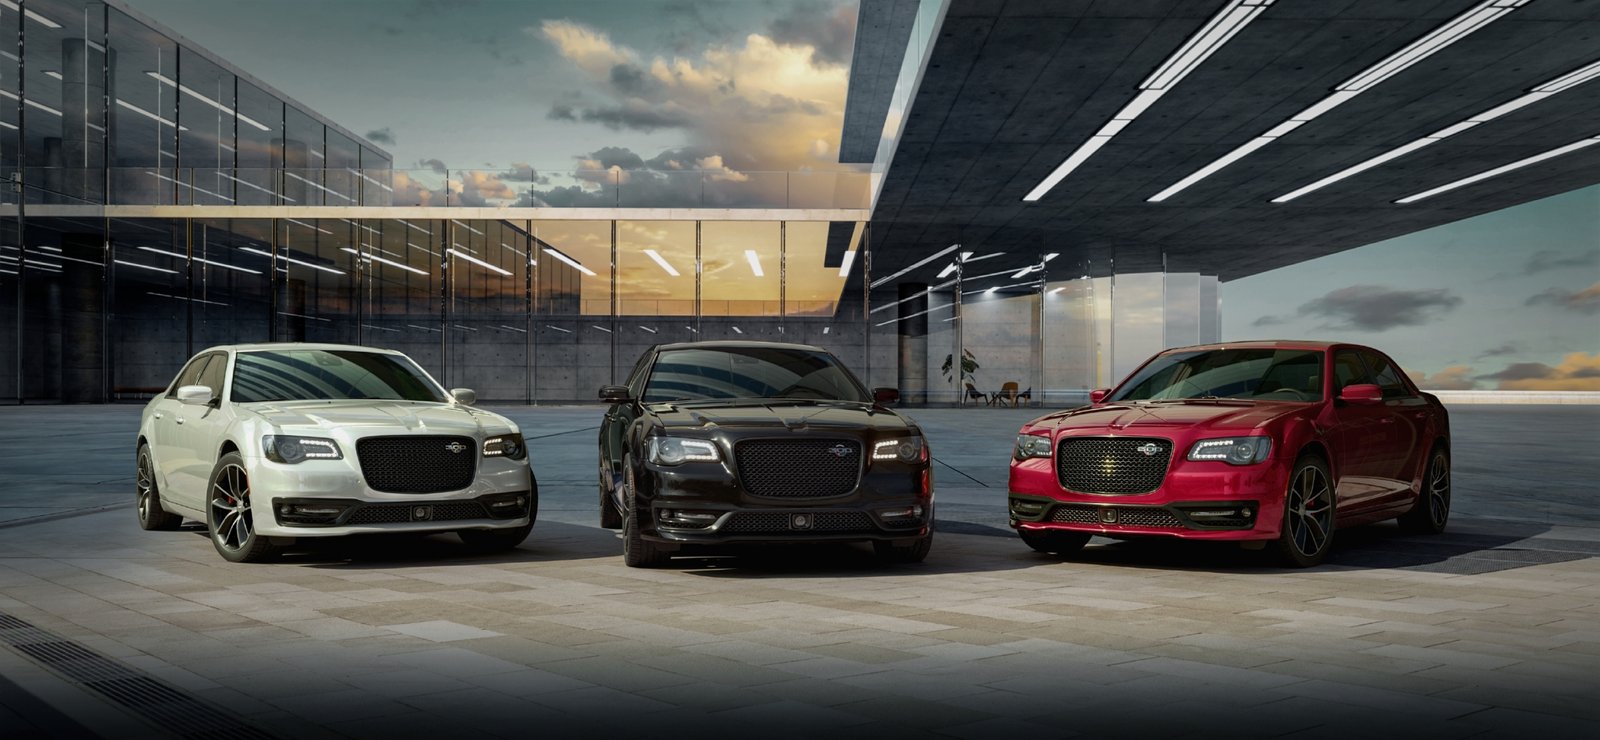 The 2023 Chrysler 300C will be available in three exterior color